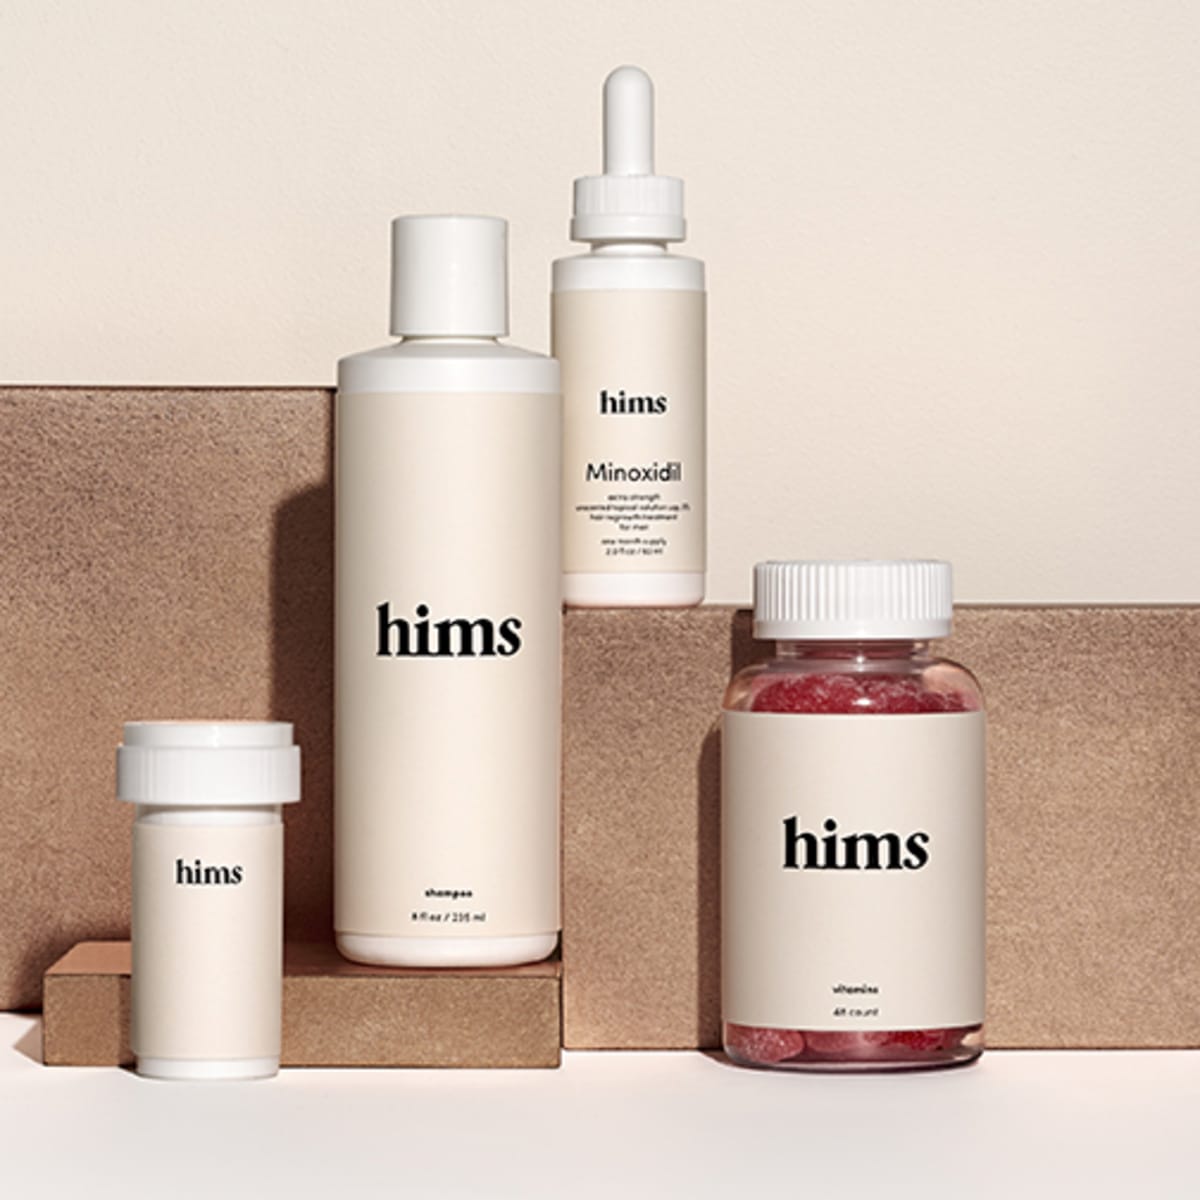 Hims and Hair Loss. Learn More About This Affordable New Grooming Brand. -  Men's Journal